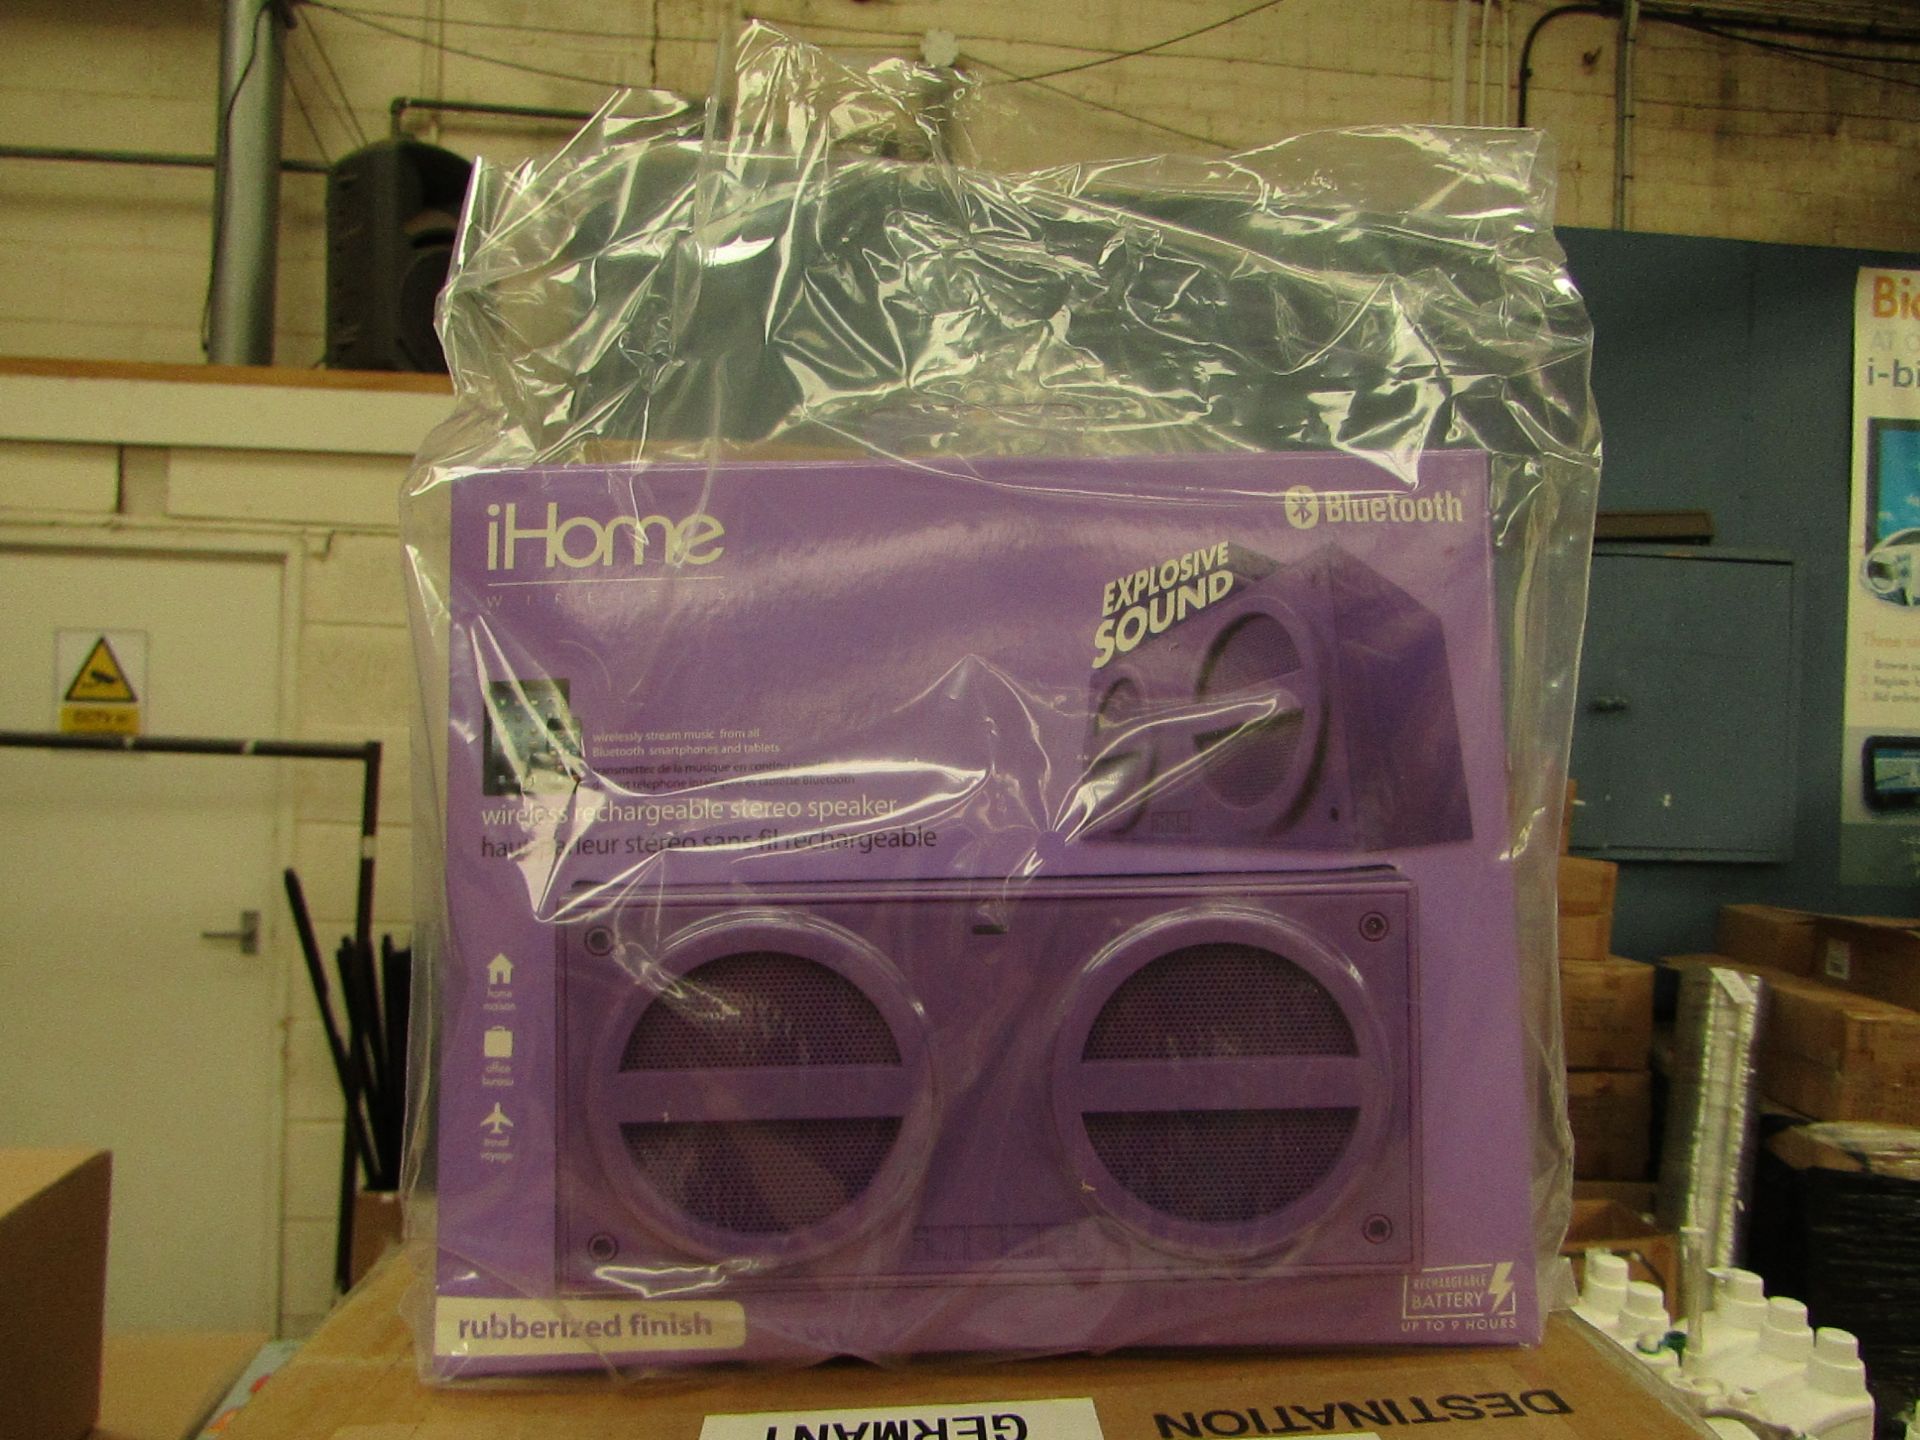 Ihome - Wireless Bluetooth Rechargeable Stereo Speaker (Purple) - New & Boxed.